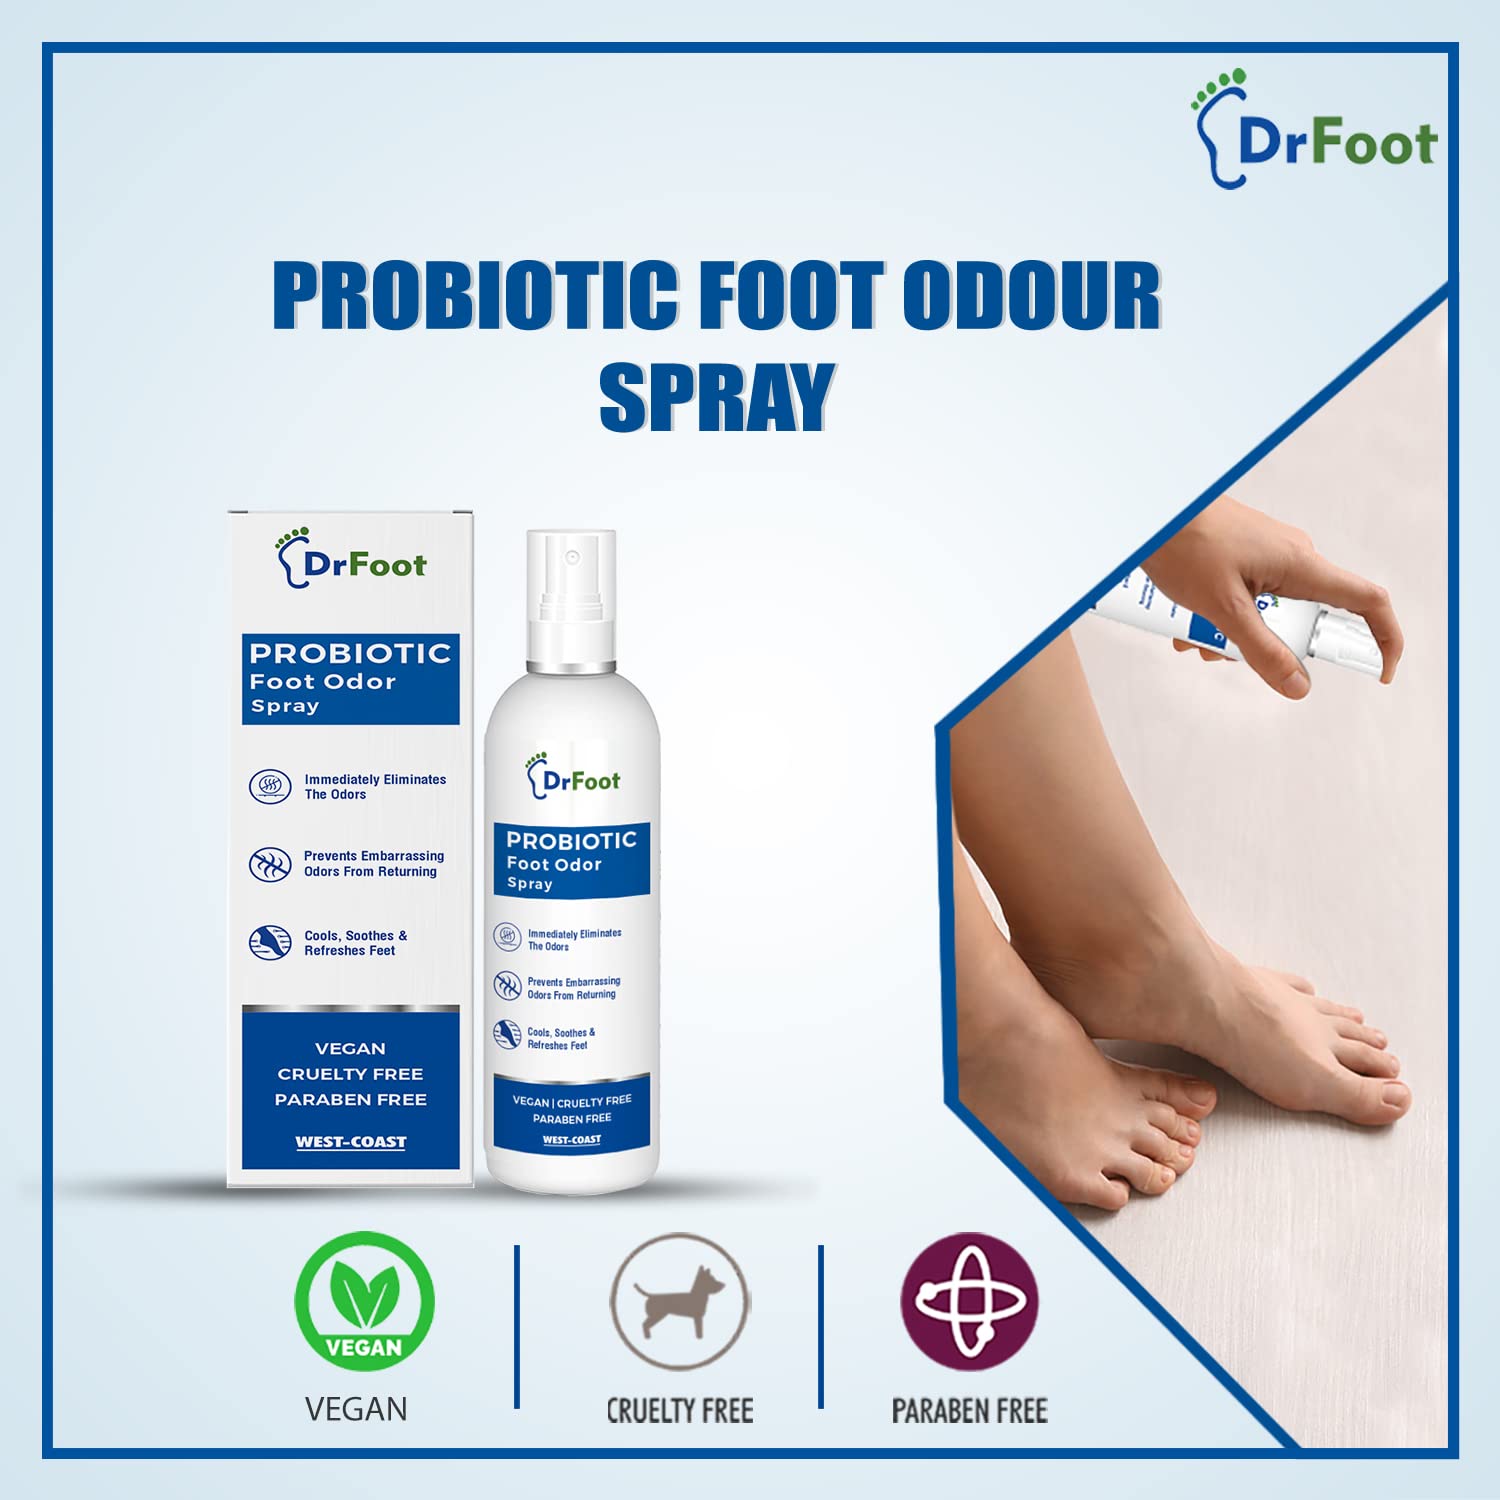 Dr Foot Probiotic Foot Odor Spray Helps to remove Feet & Shoes Worst Odors, Cools, Soothes & Refreshes Feet with the goodness of Lemon Grass Oil, Tea Tree Oil - 100ml (Pack of 10)